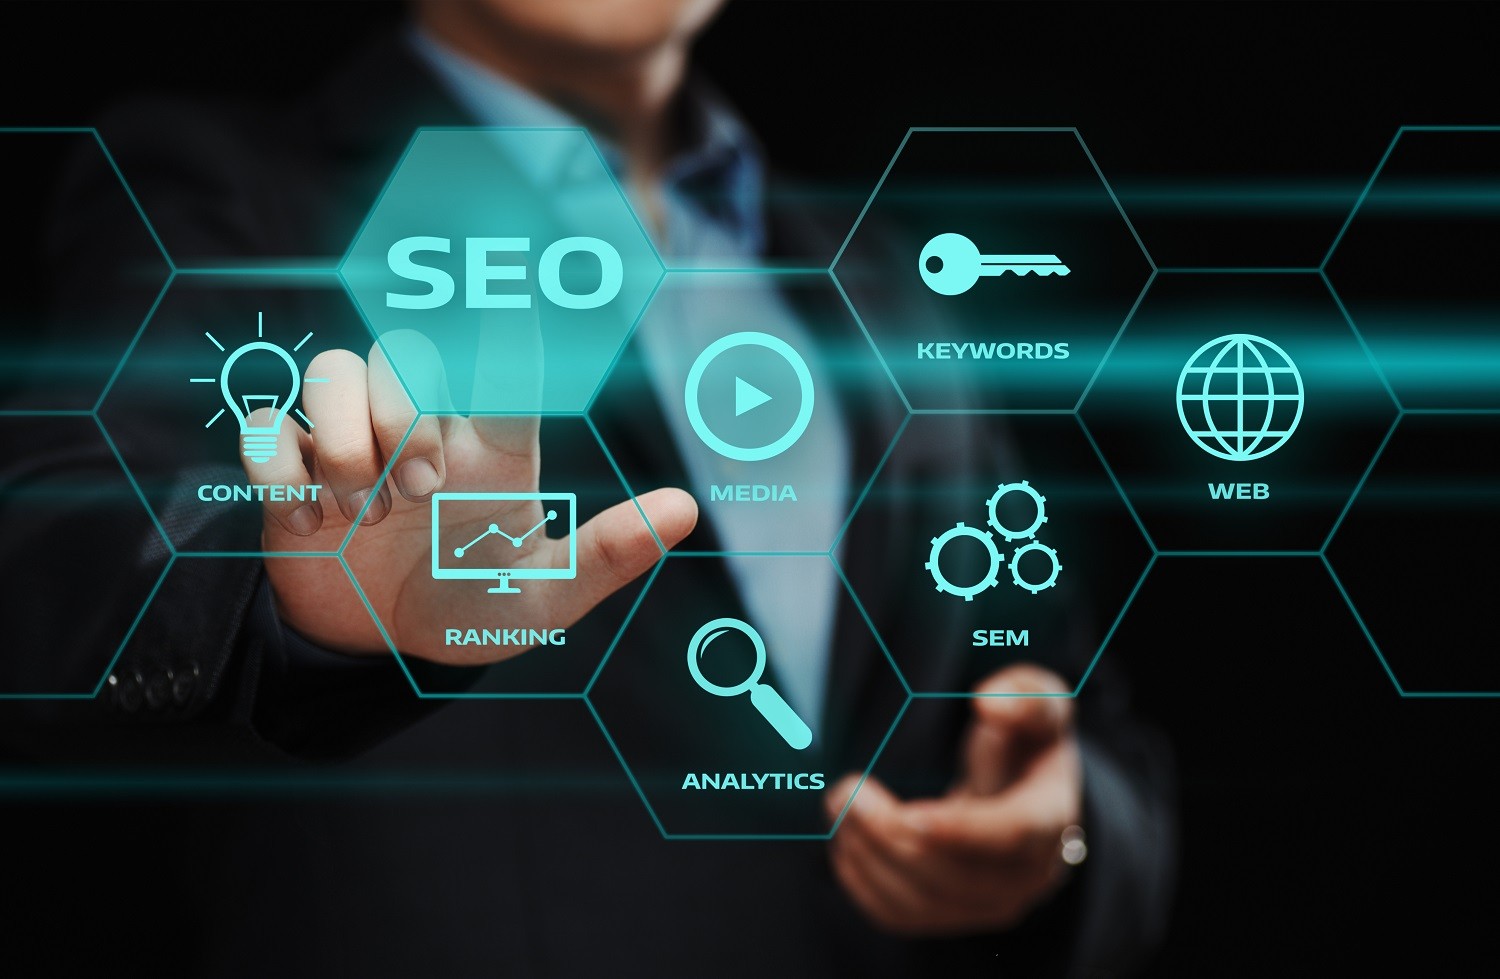 How to use technical SEO to improve your website's ranking